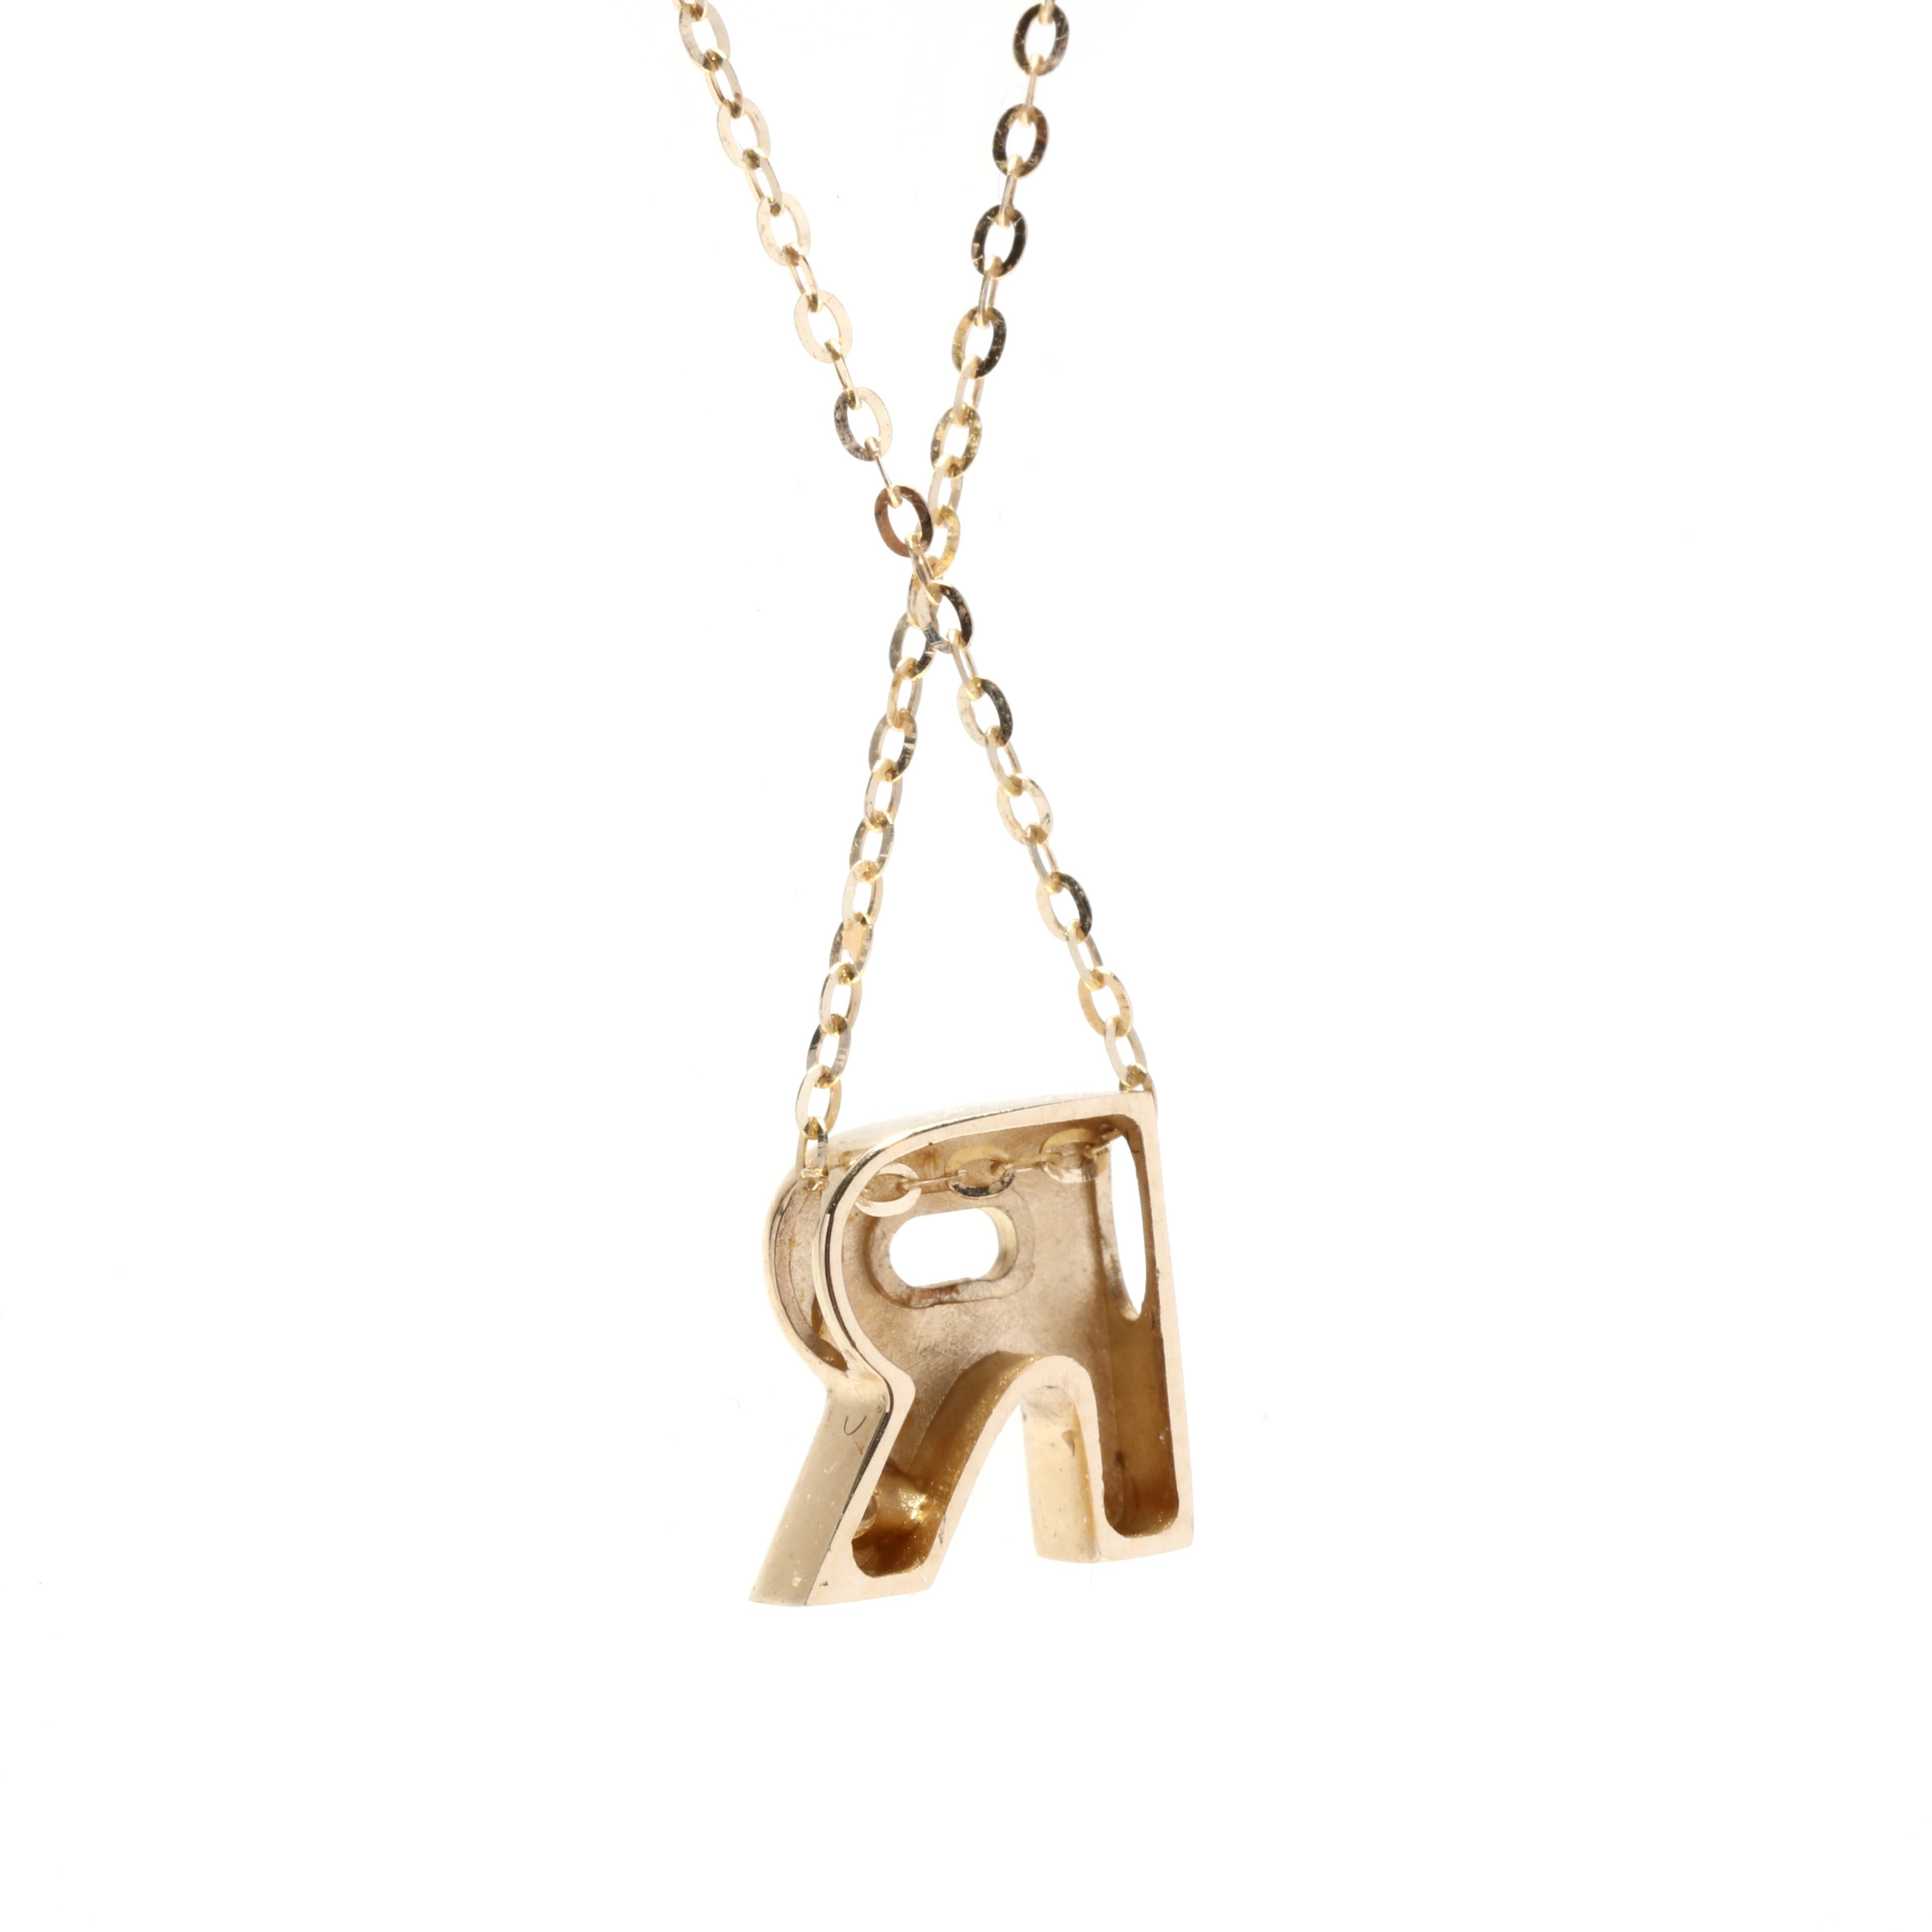 This stunning necklace features a single stone initial pendant in the shape of the letter R. Crafted from 14K yellow gold, the pendant is adorned with a shimmering diamond that adds a touch of sparkle to the piece. The necklace measures 16 inches in